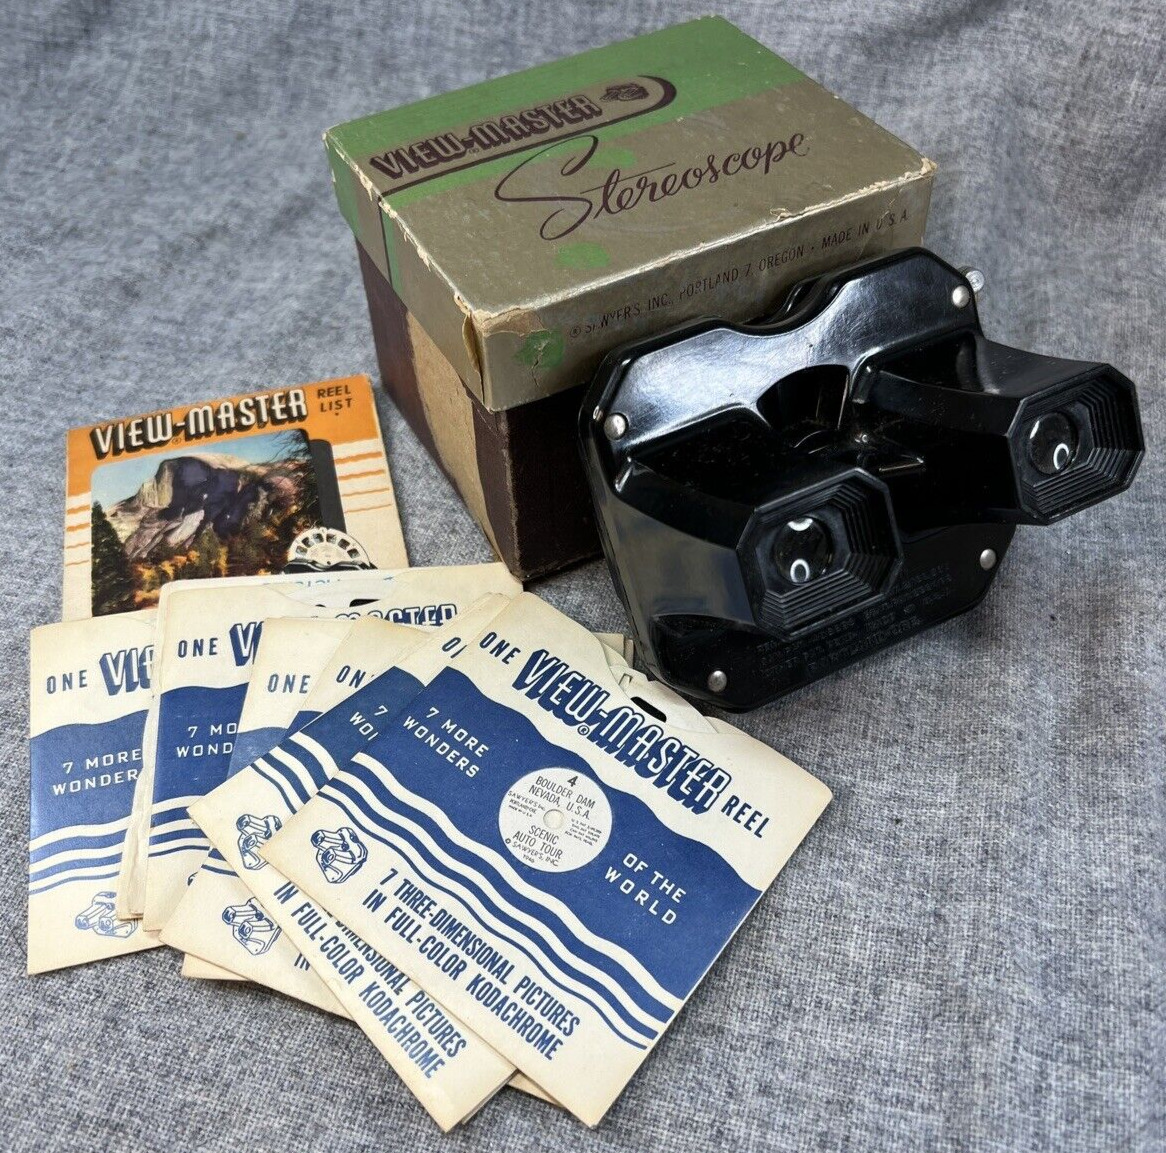 Vintage Sawyers View-Master 3D Slide Viewer Stereoscope w/ Box and 10 Reels.